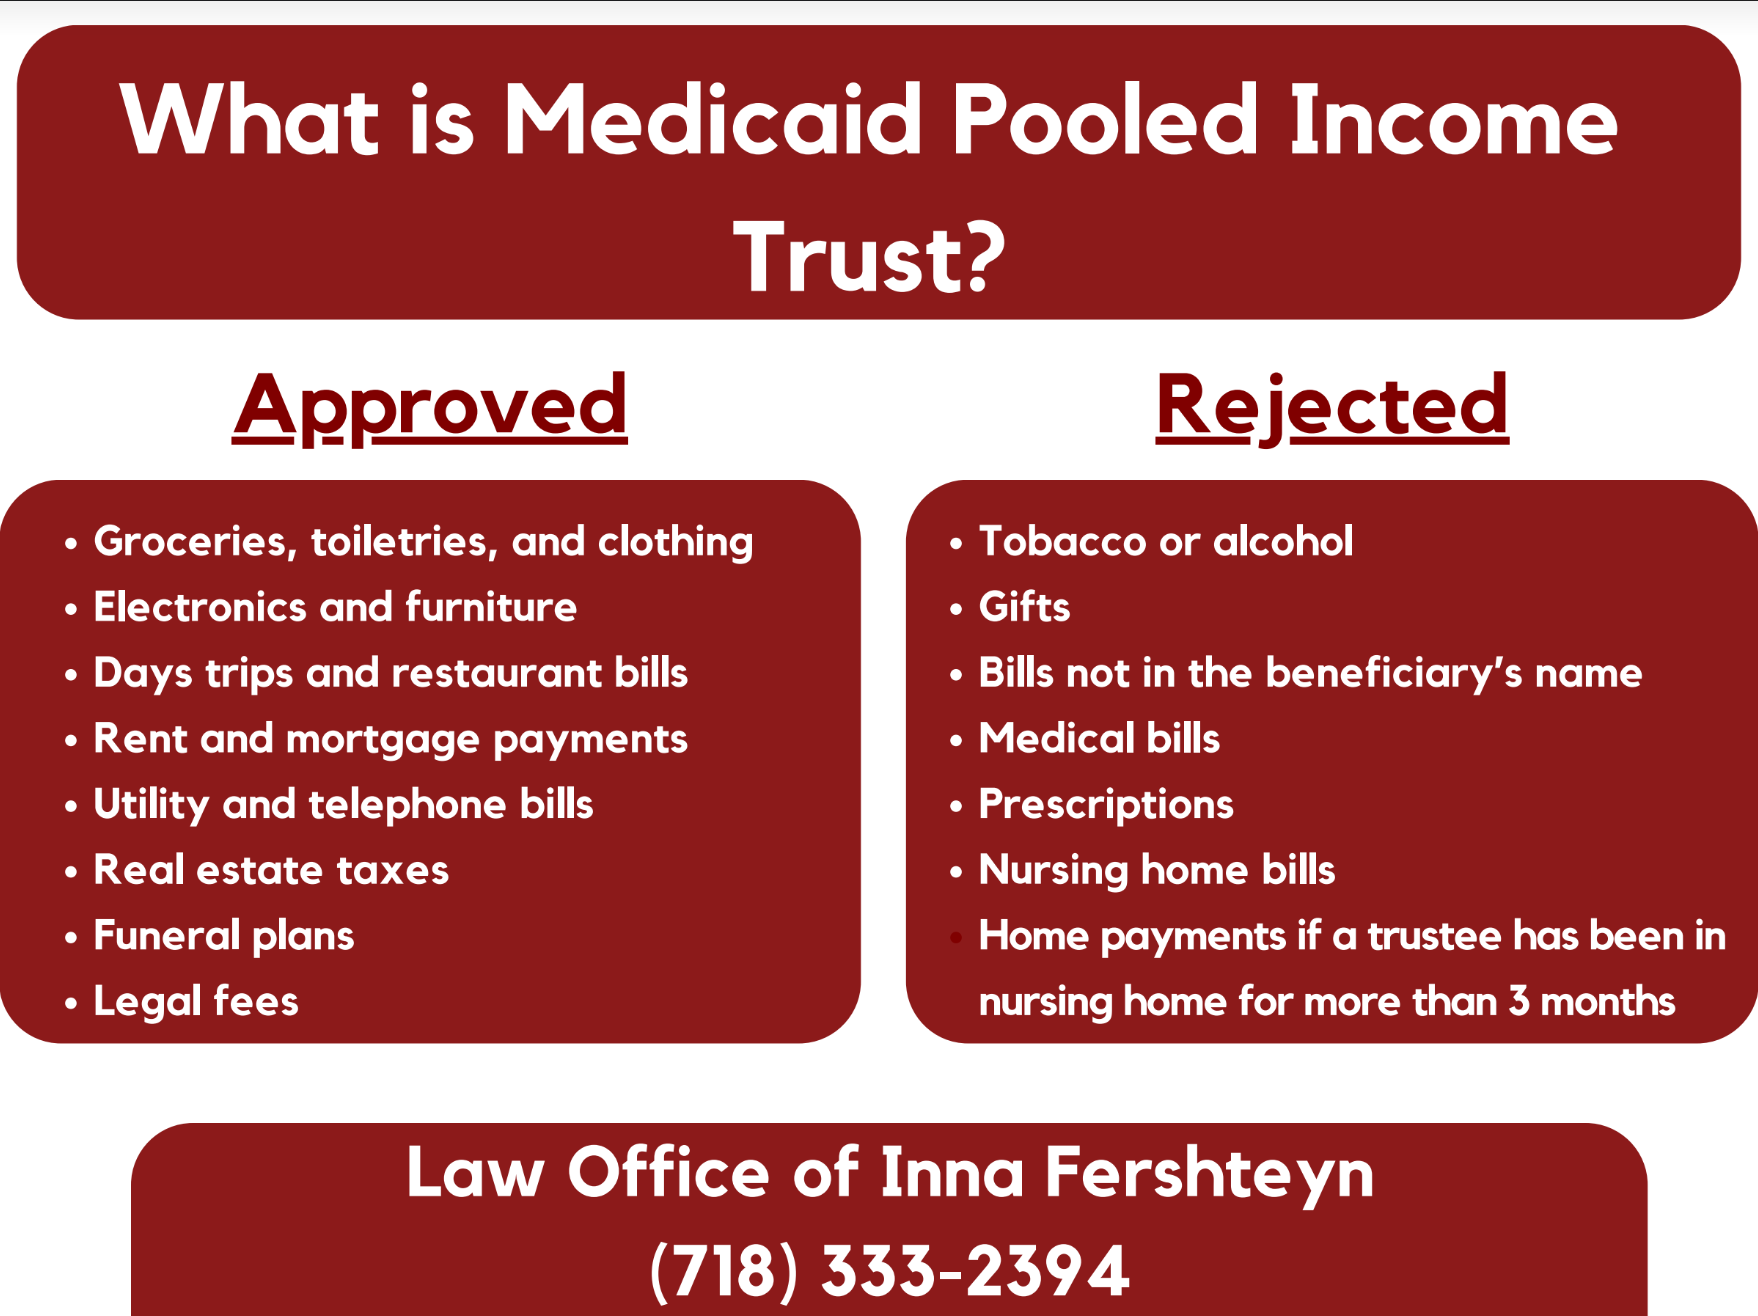 What is medicaid pooled income trust